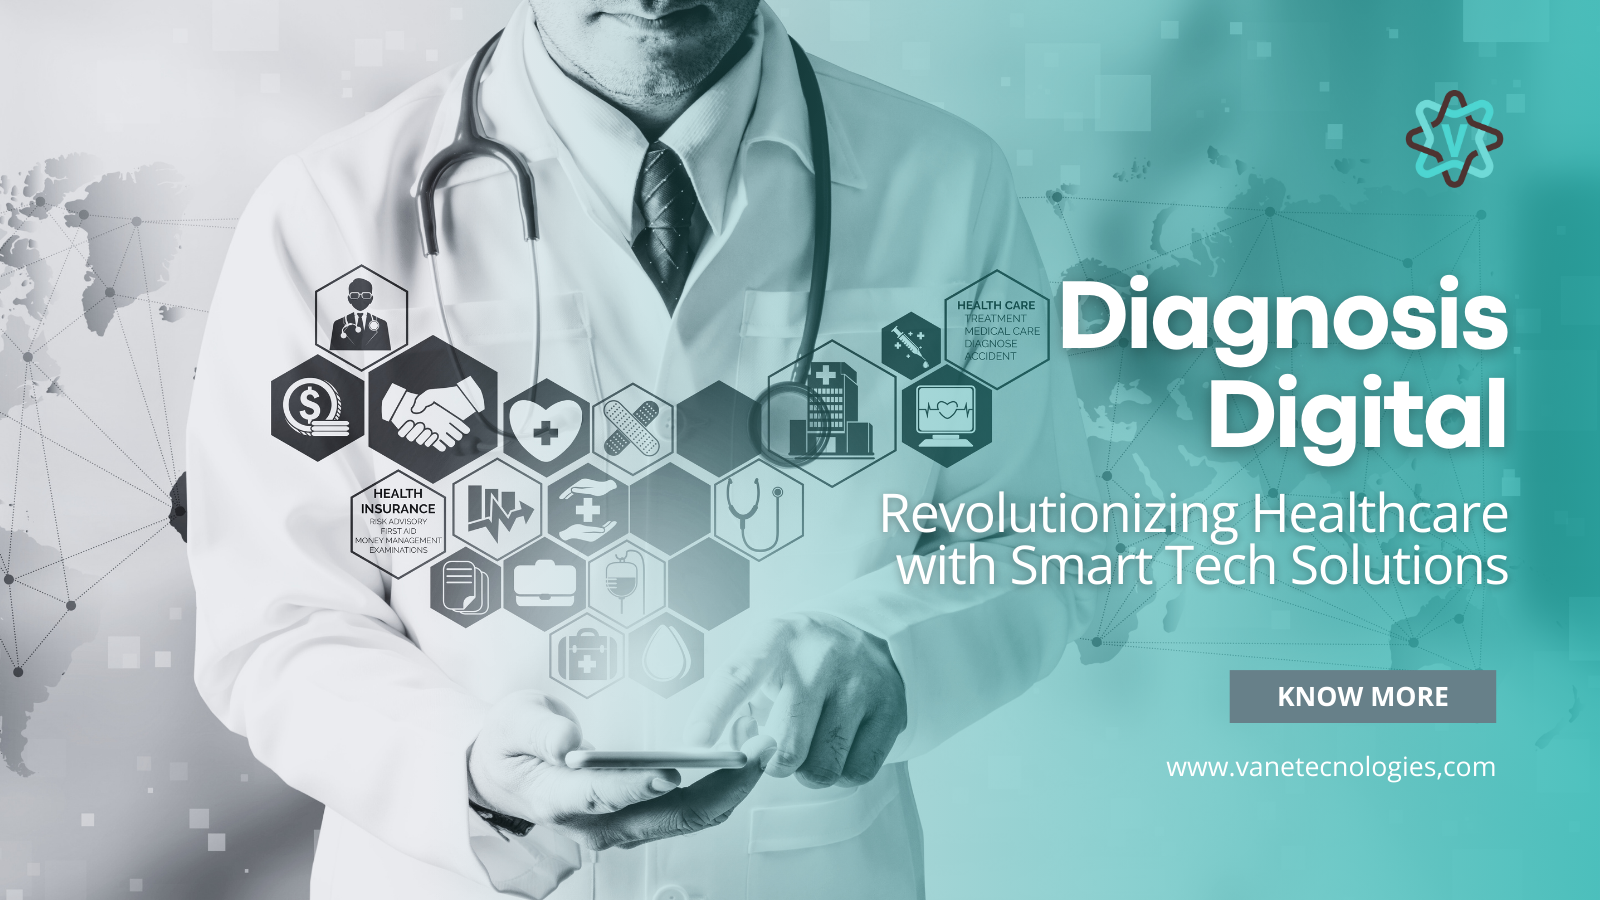 Diagnosis Digital: Revolutionizing Healthcare with Smart Tech Solutions